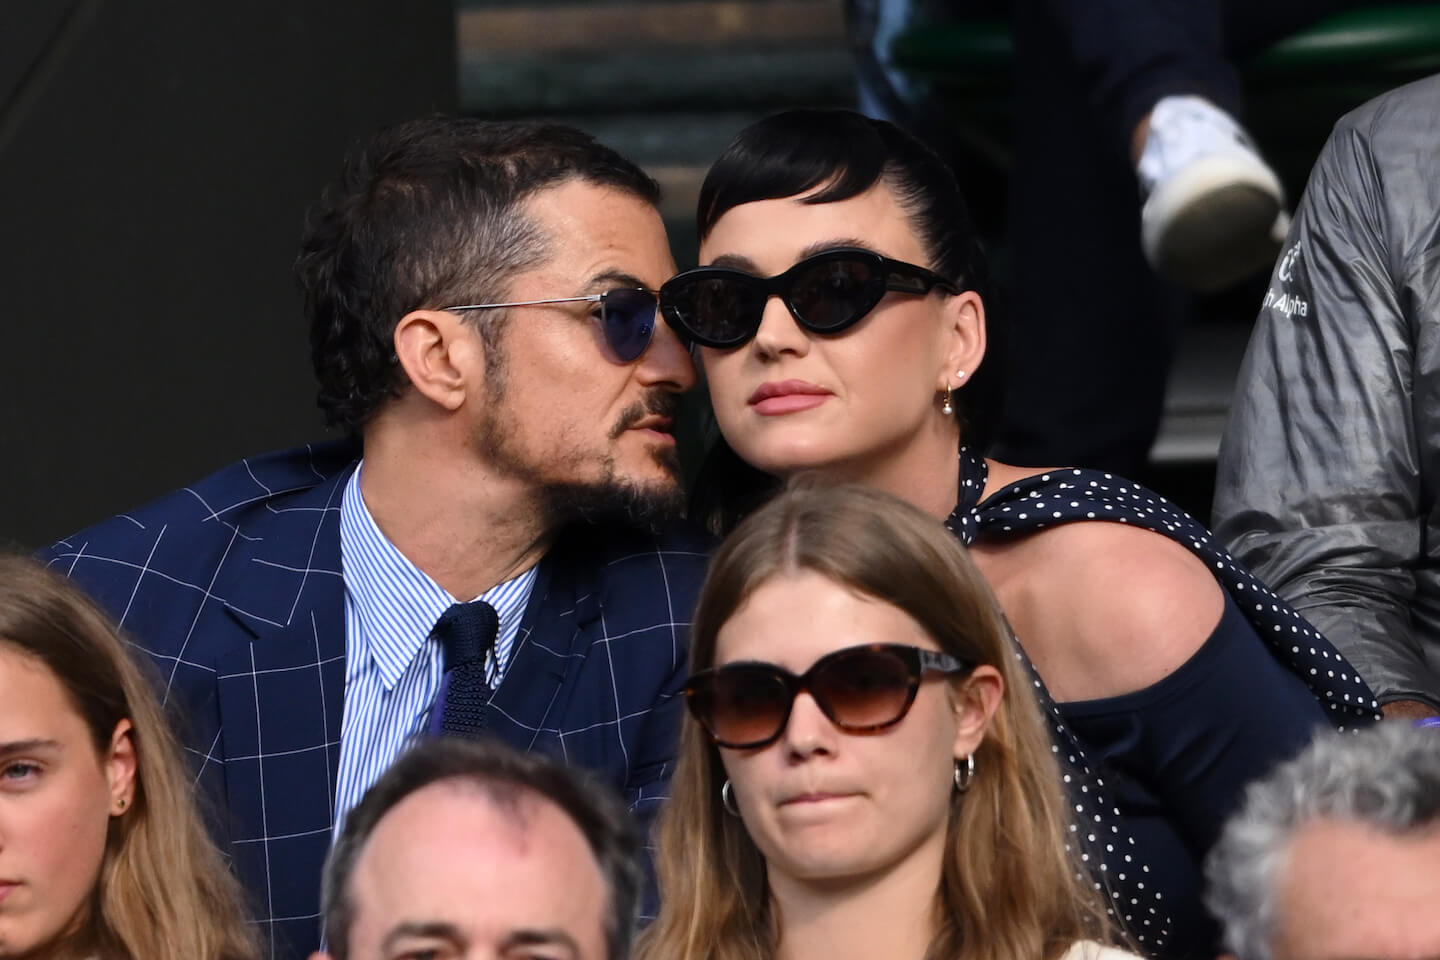 Orlando Bloom whispering into Katy Perry's ear at an event